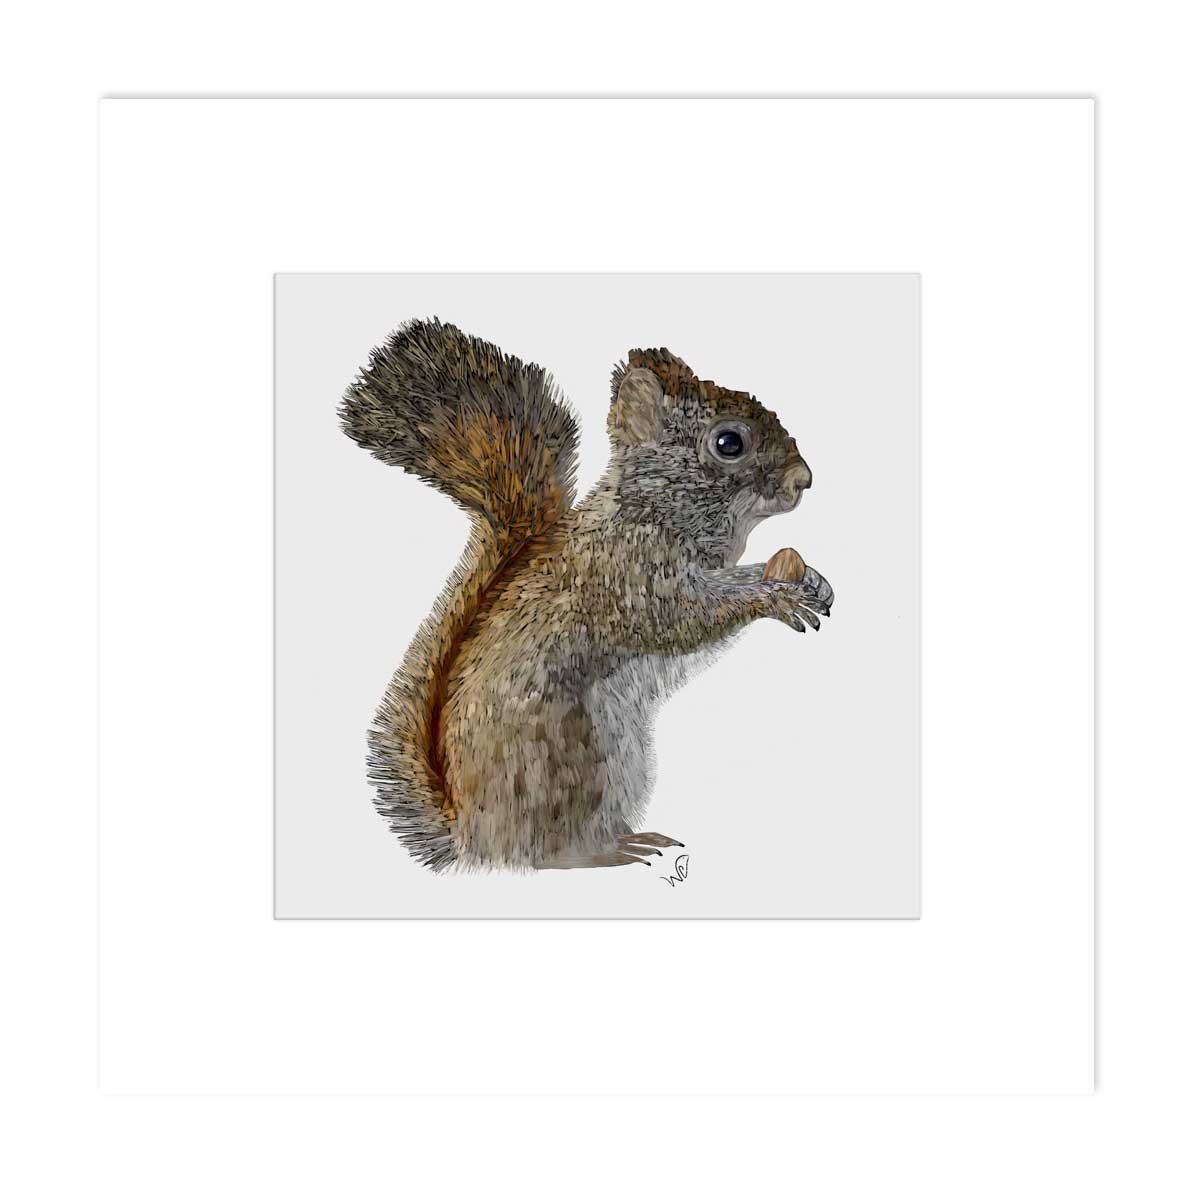 Signed & Matted Print - American Red Squirrel